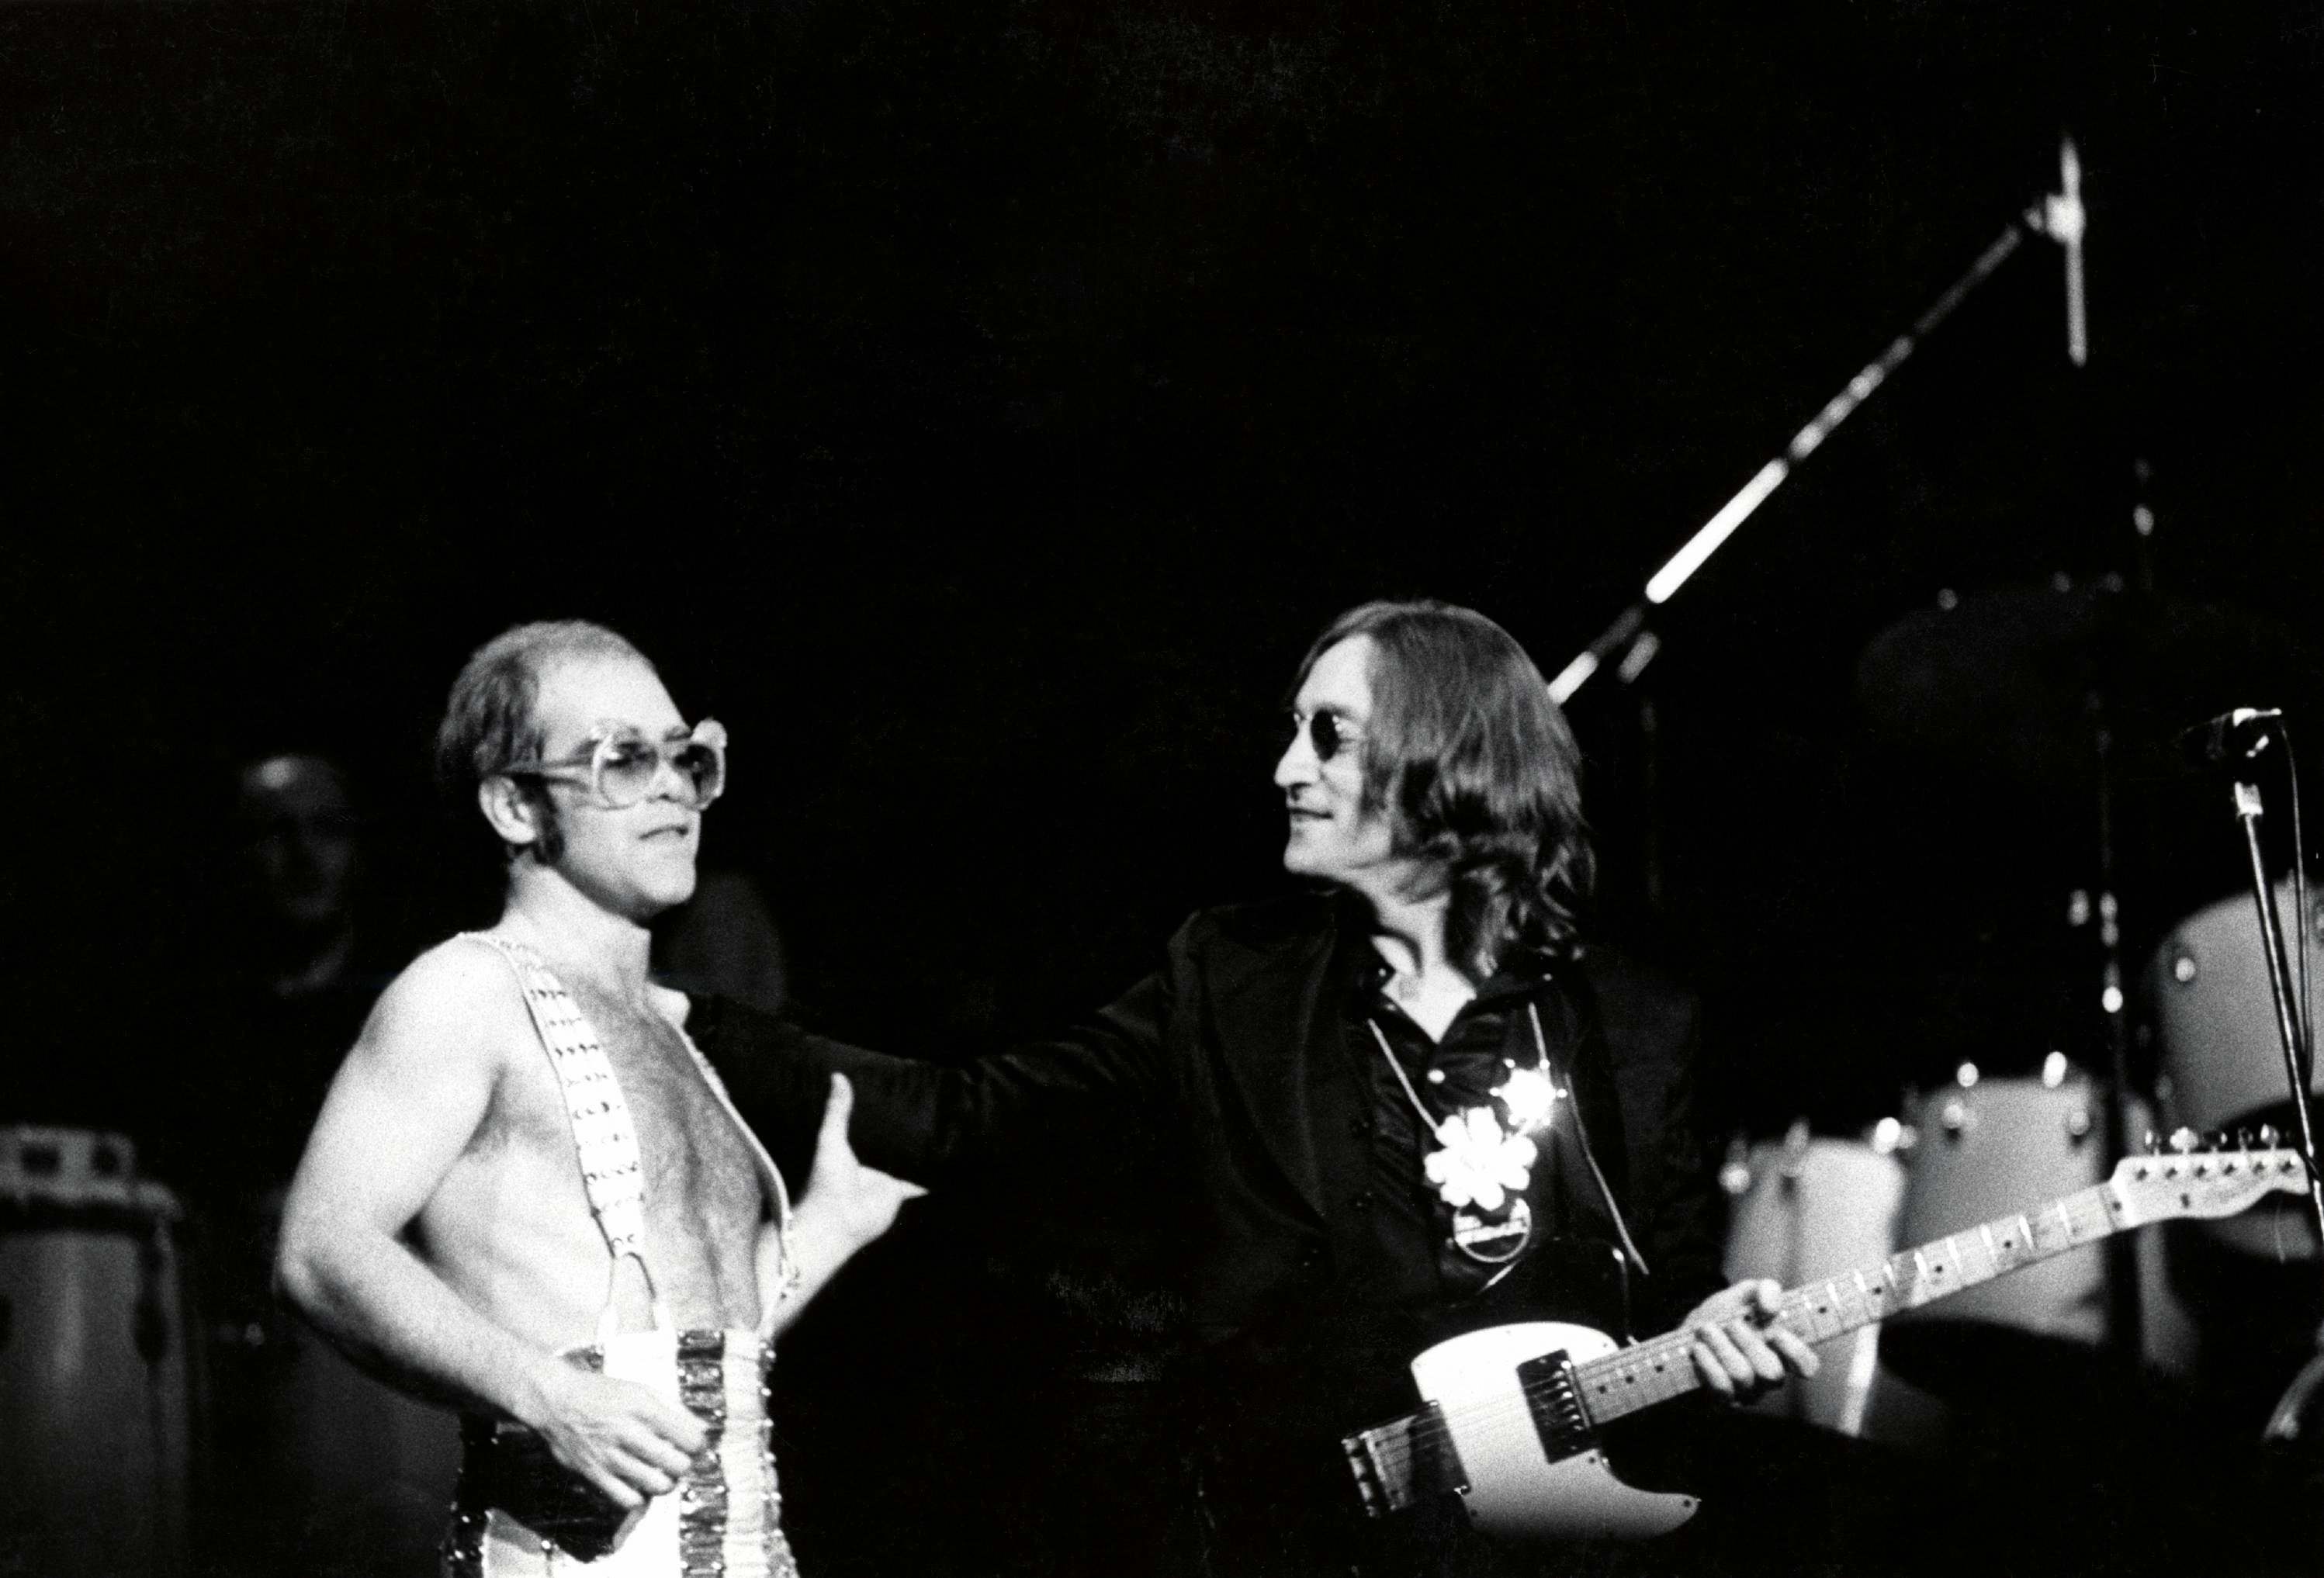 Elton John and John Lennon appear on stage together at Madison Square Garden in New York City